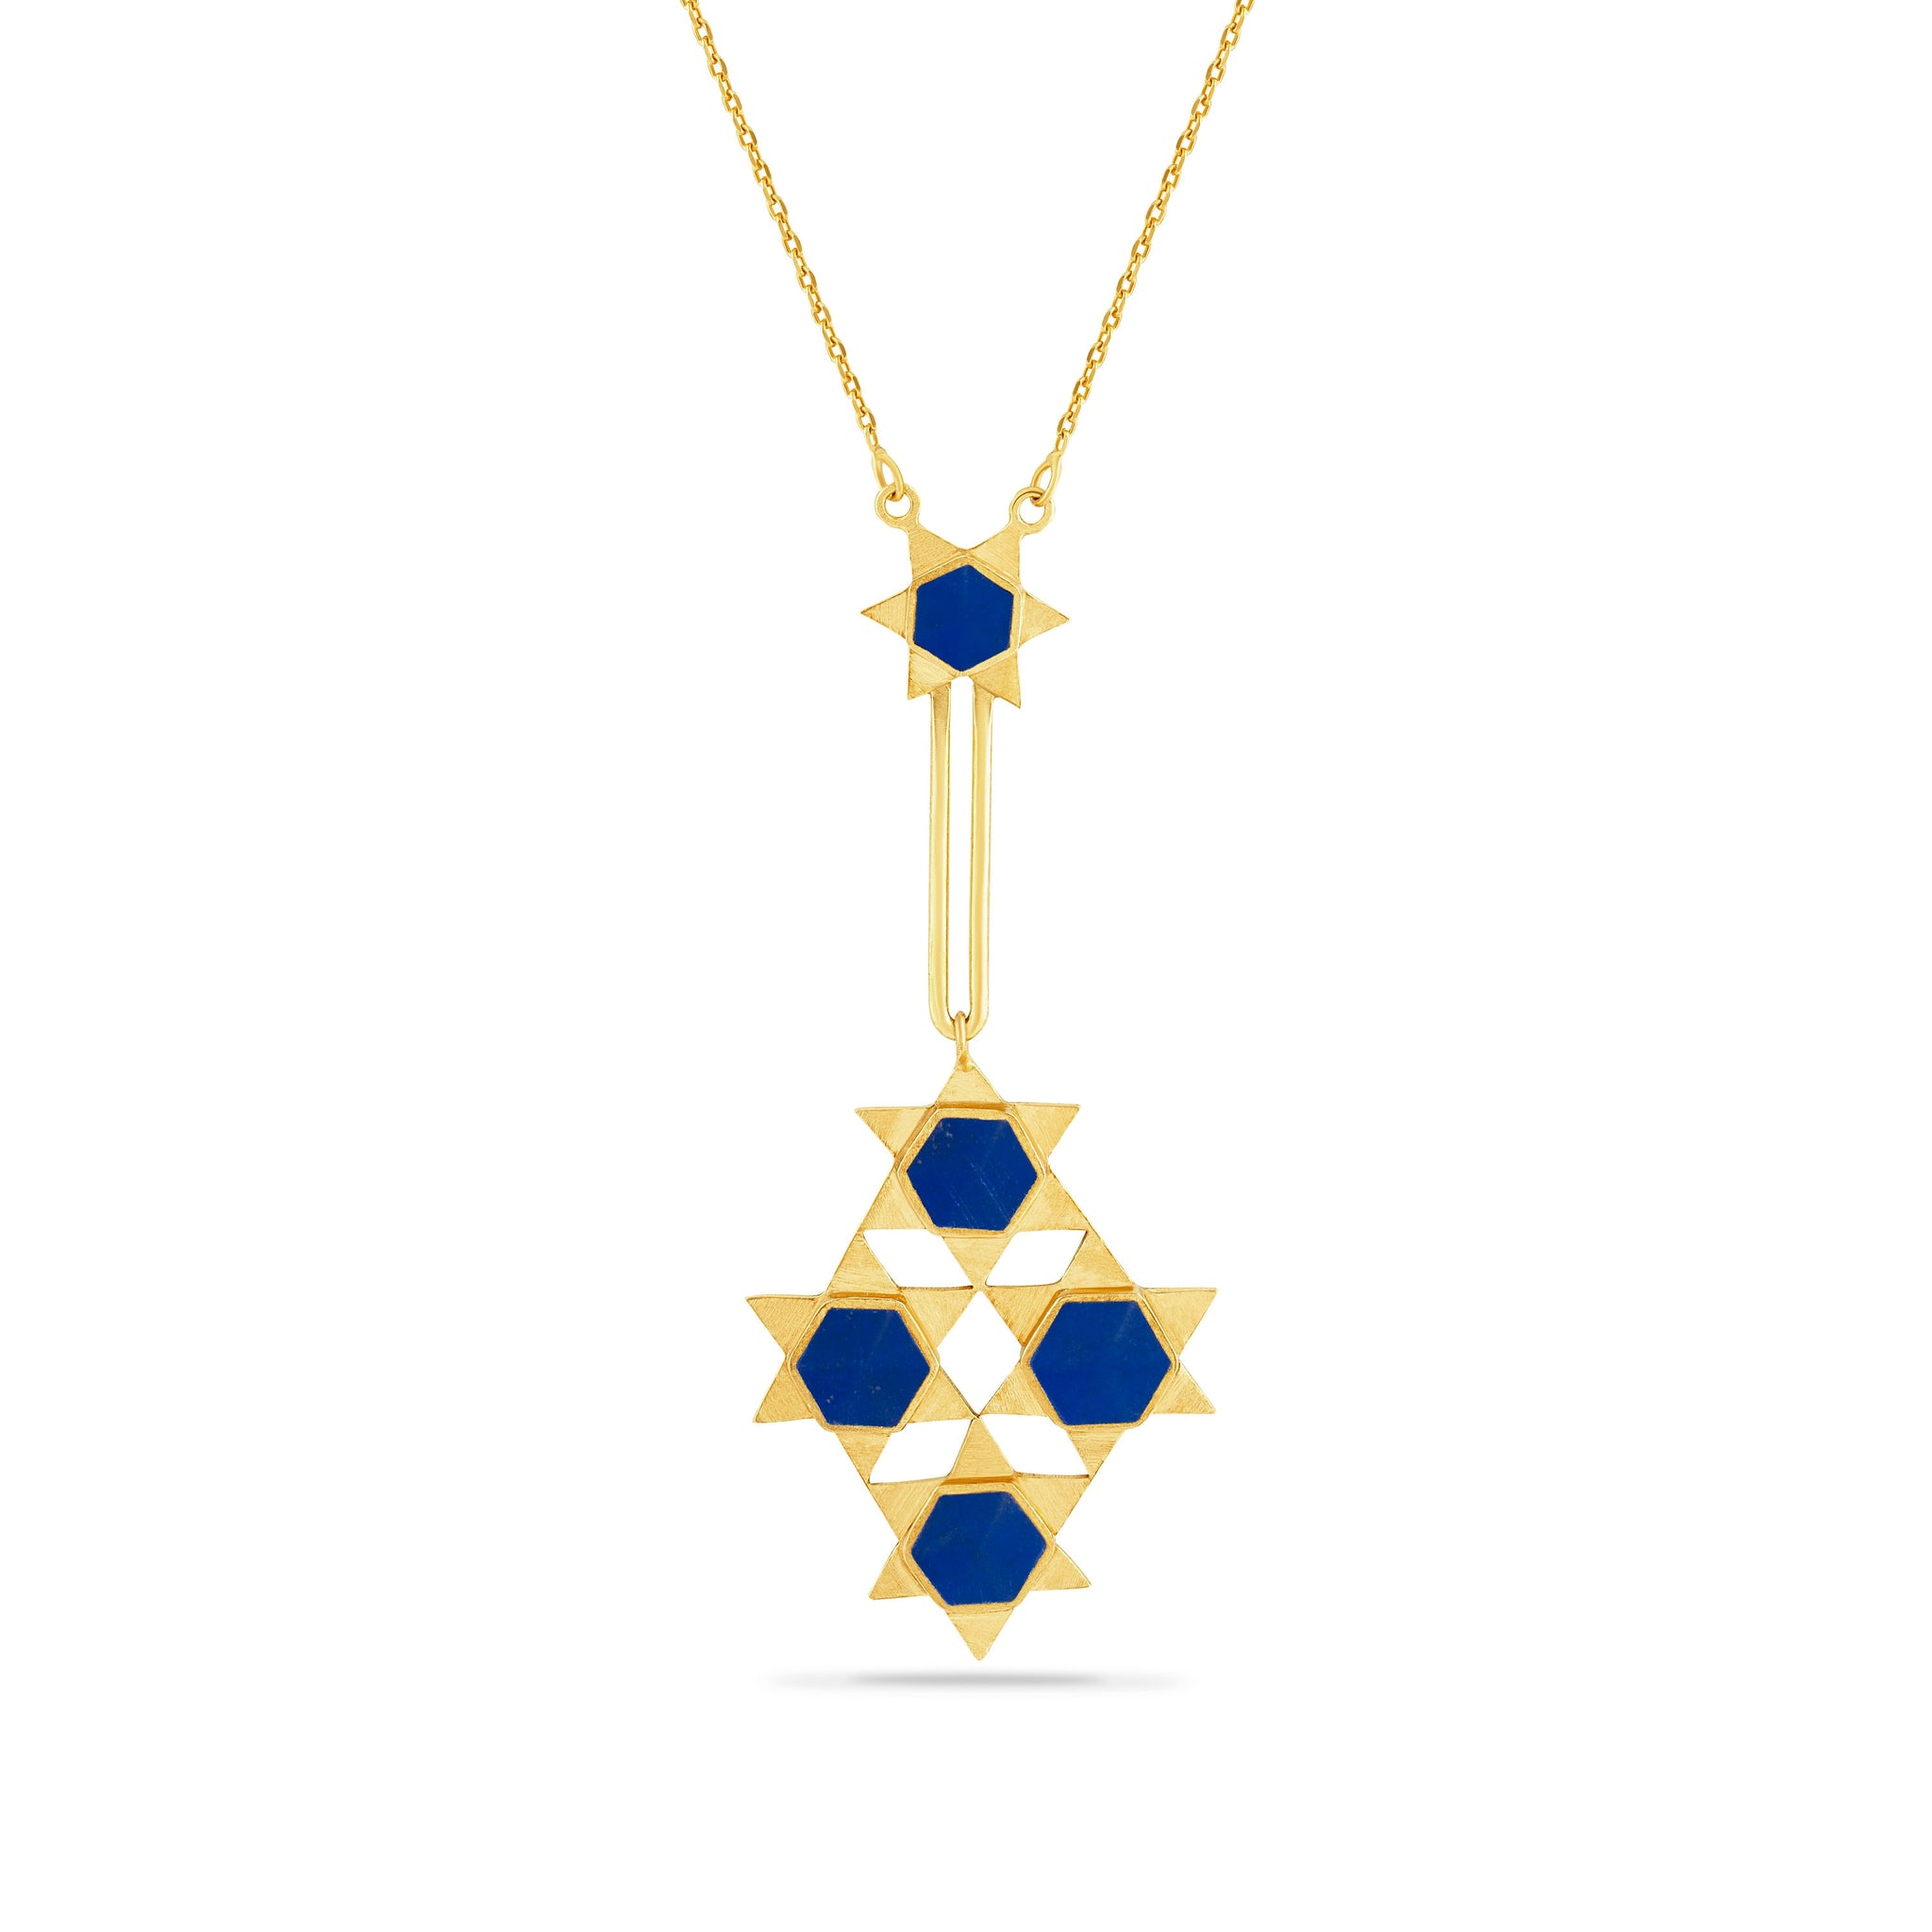 Handmade Afghan Lapis Lazuli Gold Plated Silver Pendant Necklace Elegant Inspired Jewelry Star Hexagonal Geometric Motif Gift for Her